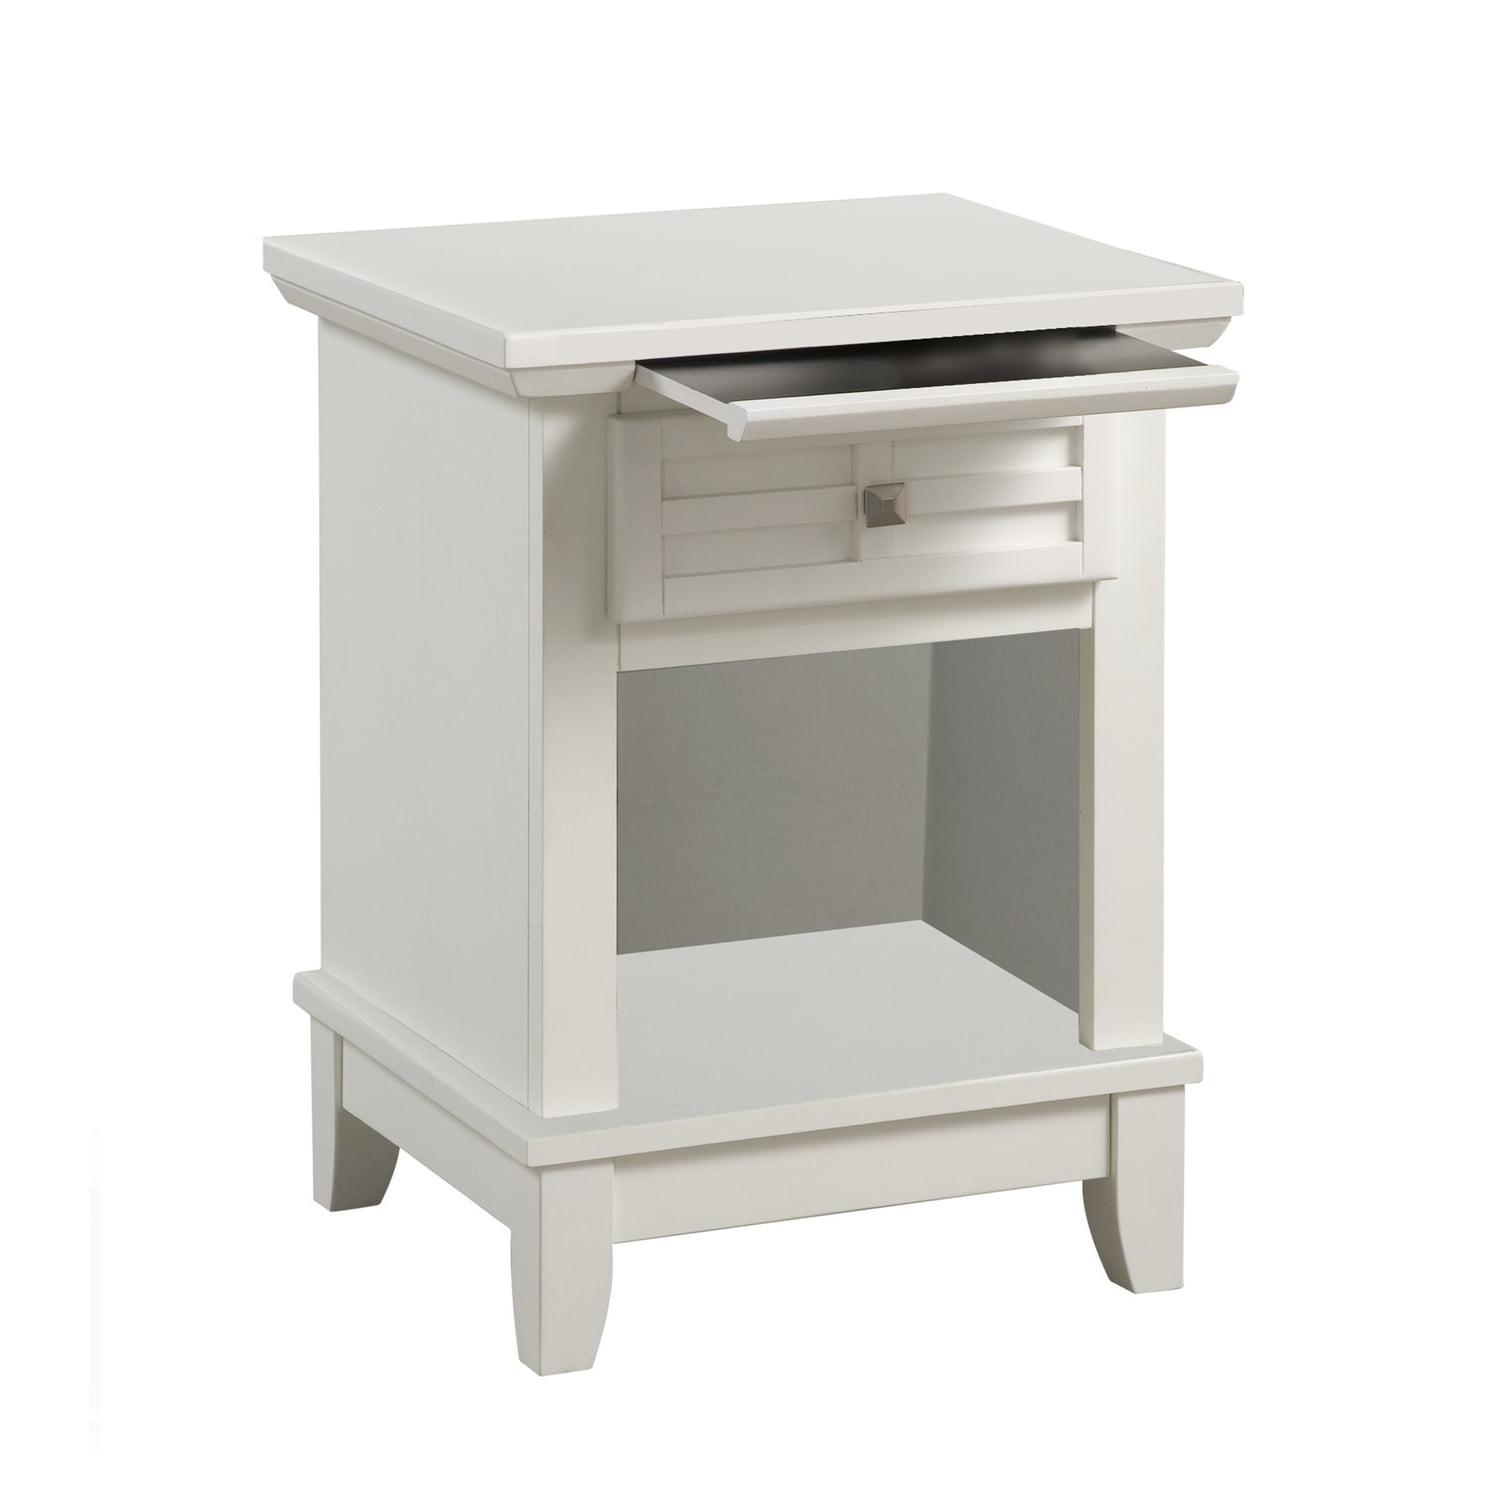 Craftsman Off-White Solid Hardwood Nightstand with Drawer and Slide-Out Shelf